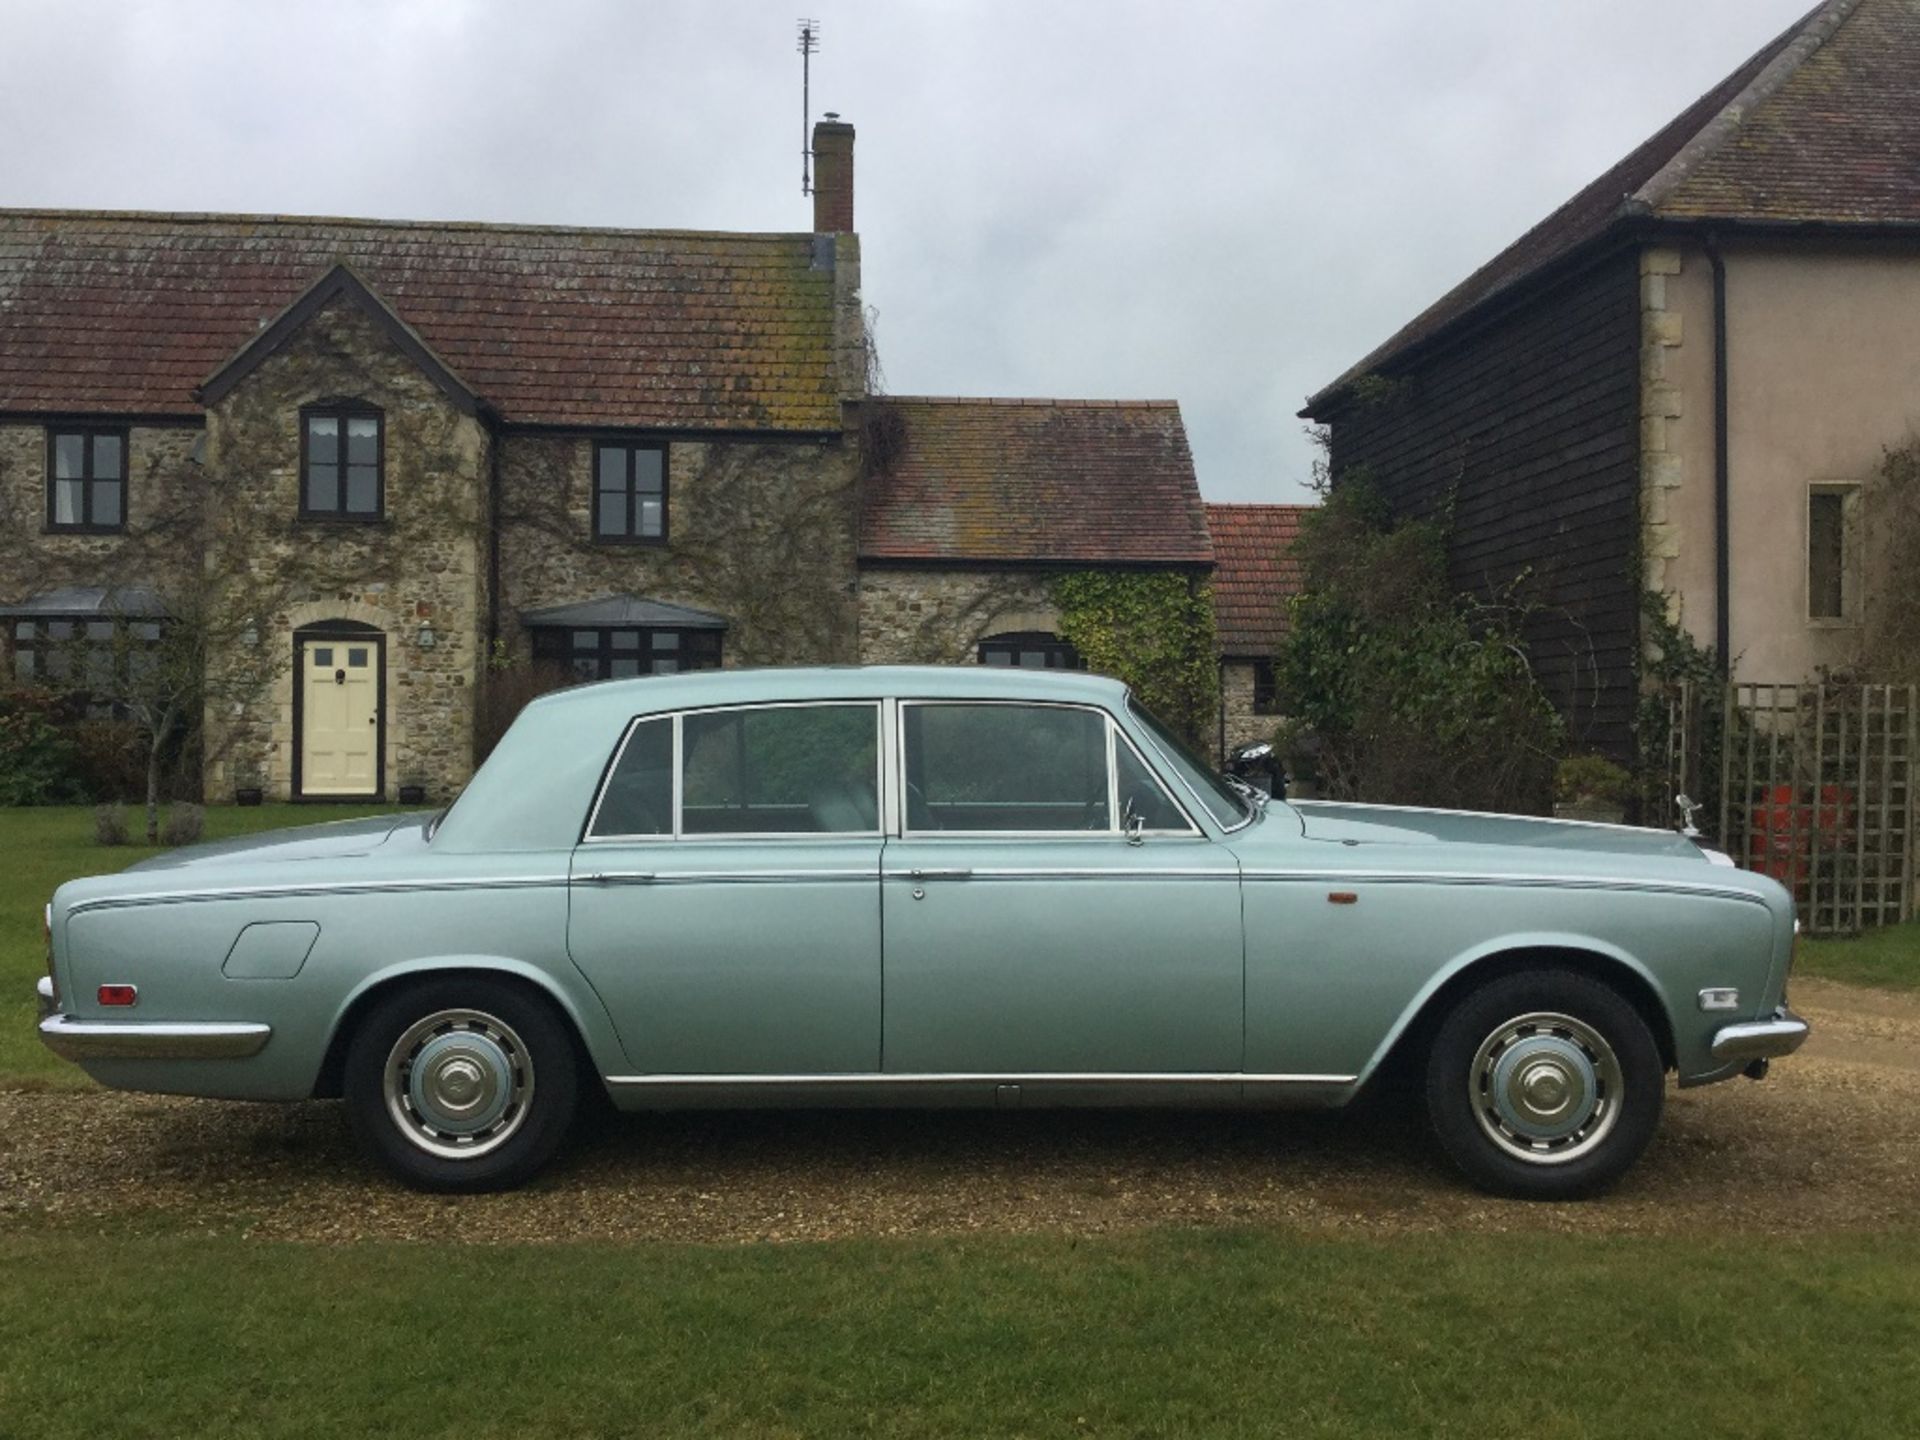 A 1973 Rolls Royce Silver Shadow I, registration number 840 FMP, opalescent silver blue metallic. - Image 5 of 5